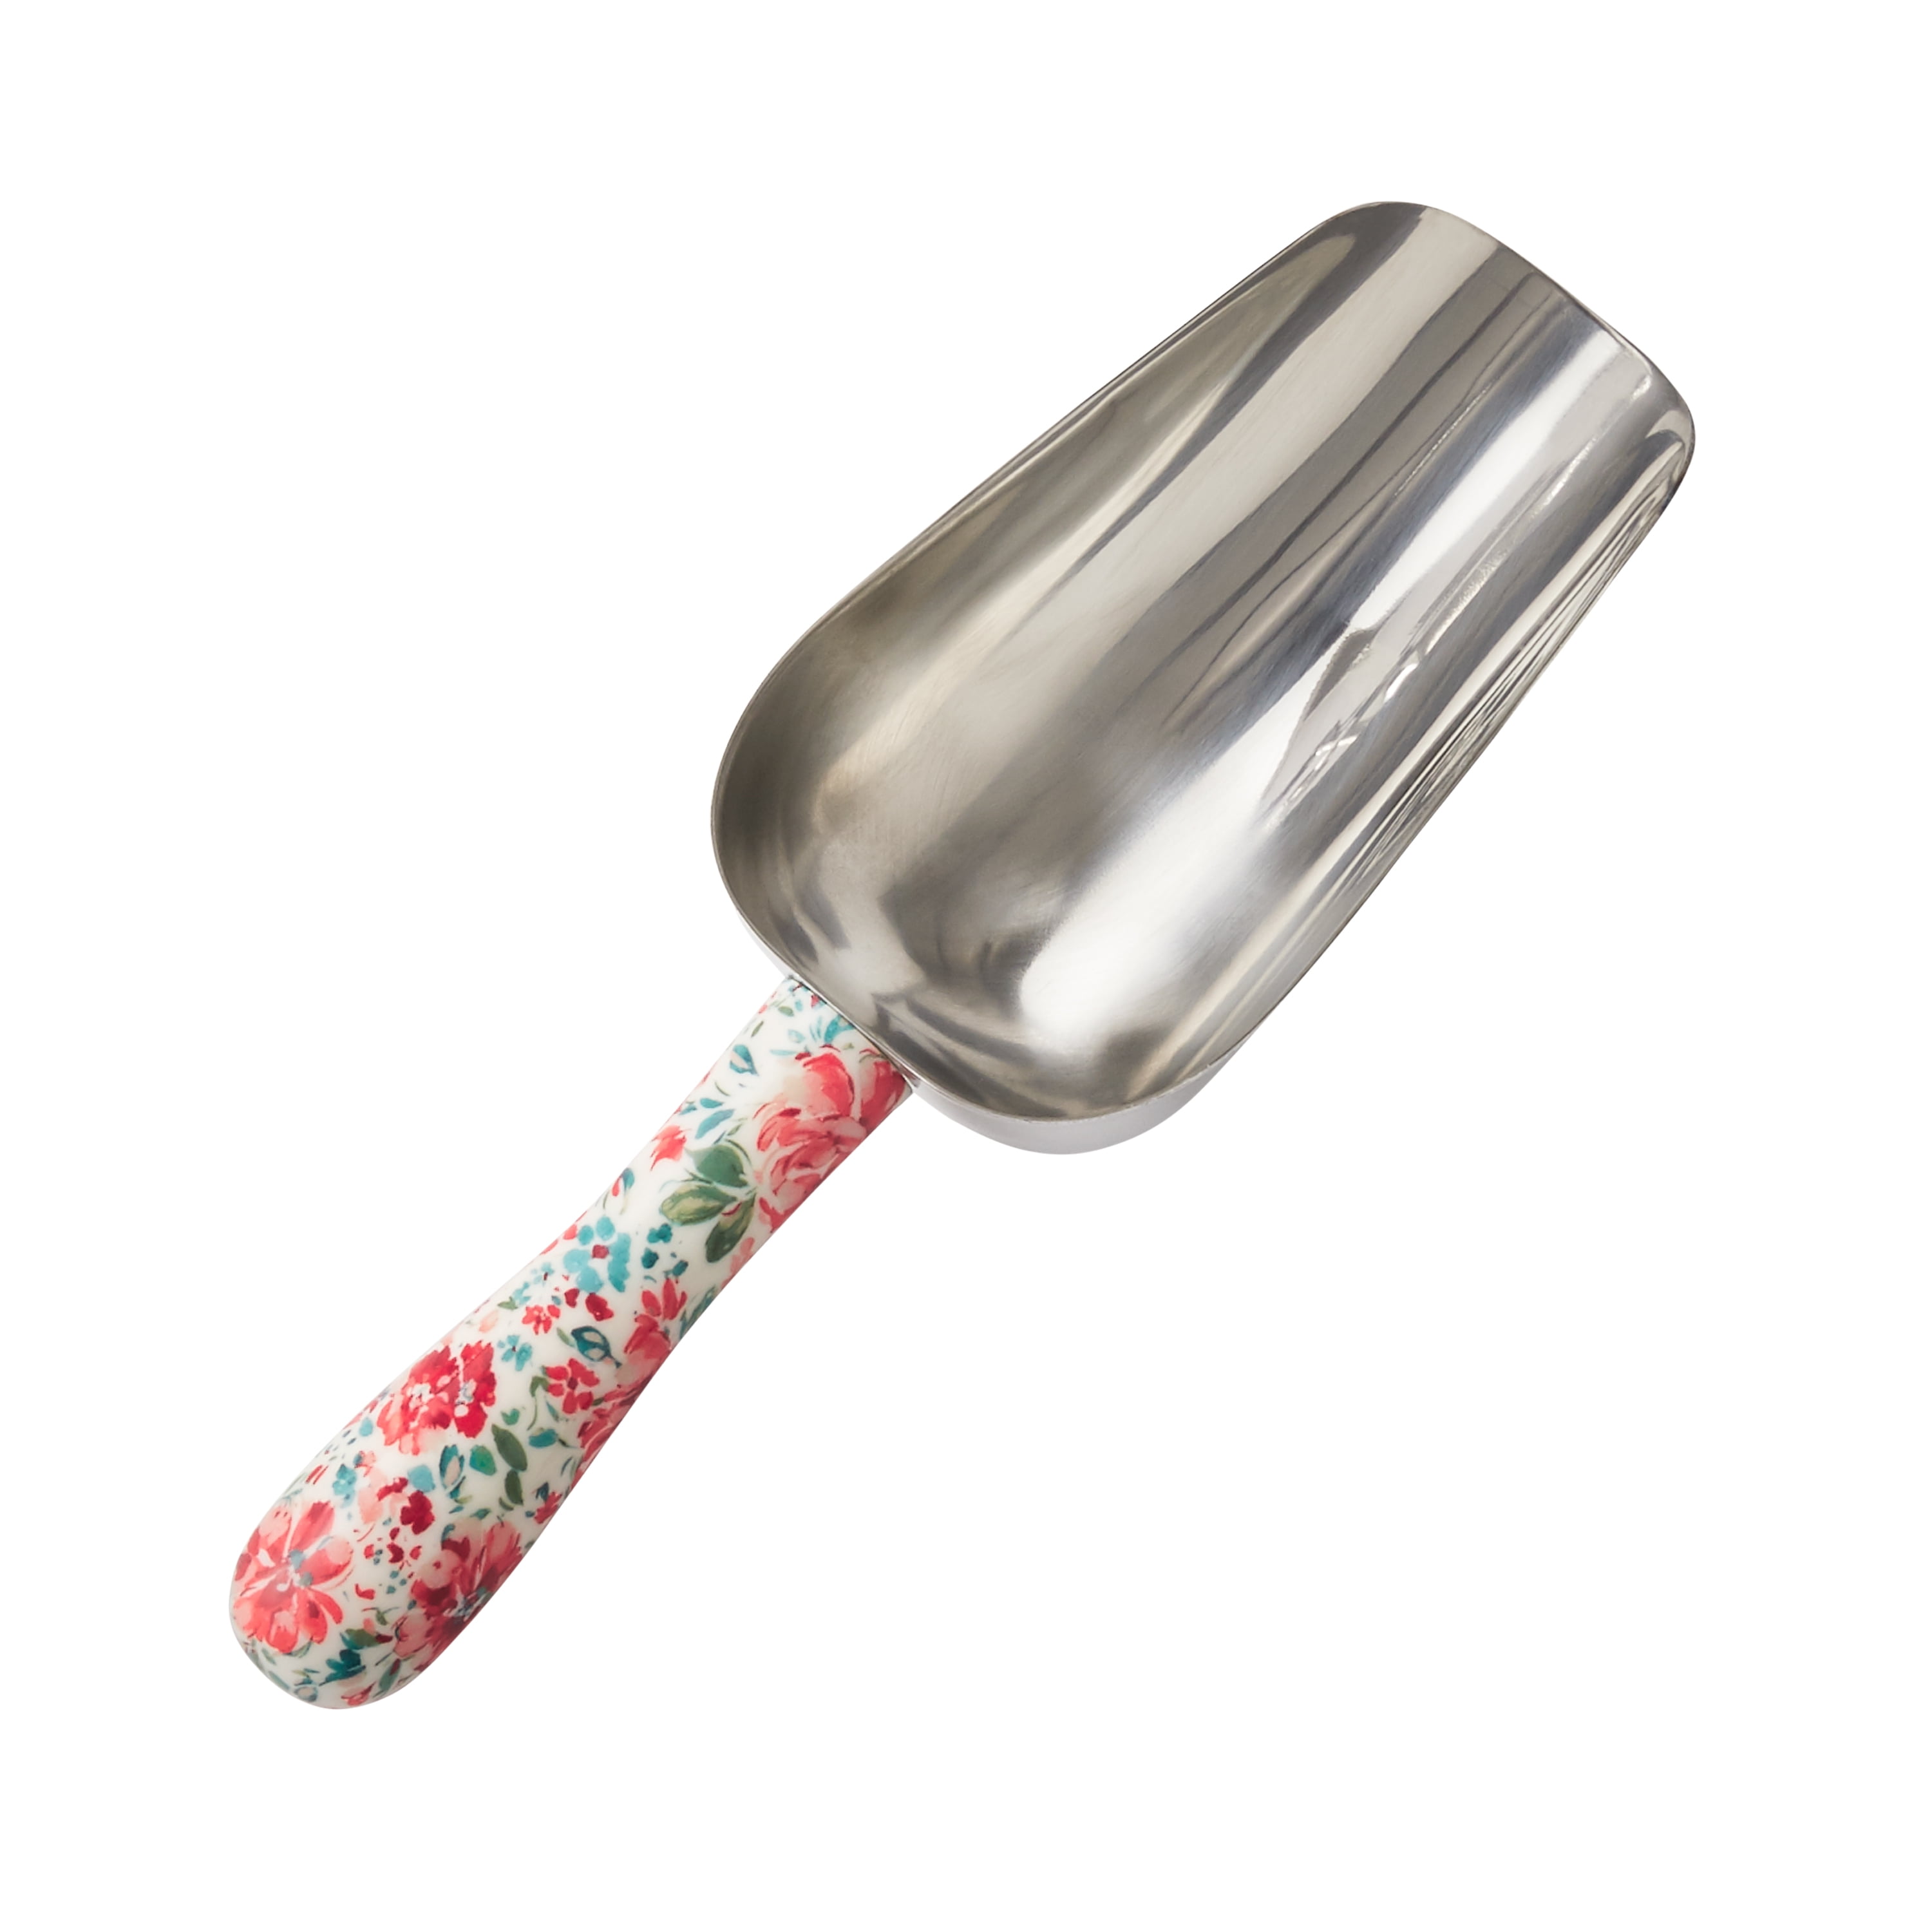 The Pioneer Woman 3-Piece Stainless Steel Flour, Cookie, and Ice